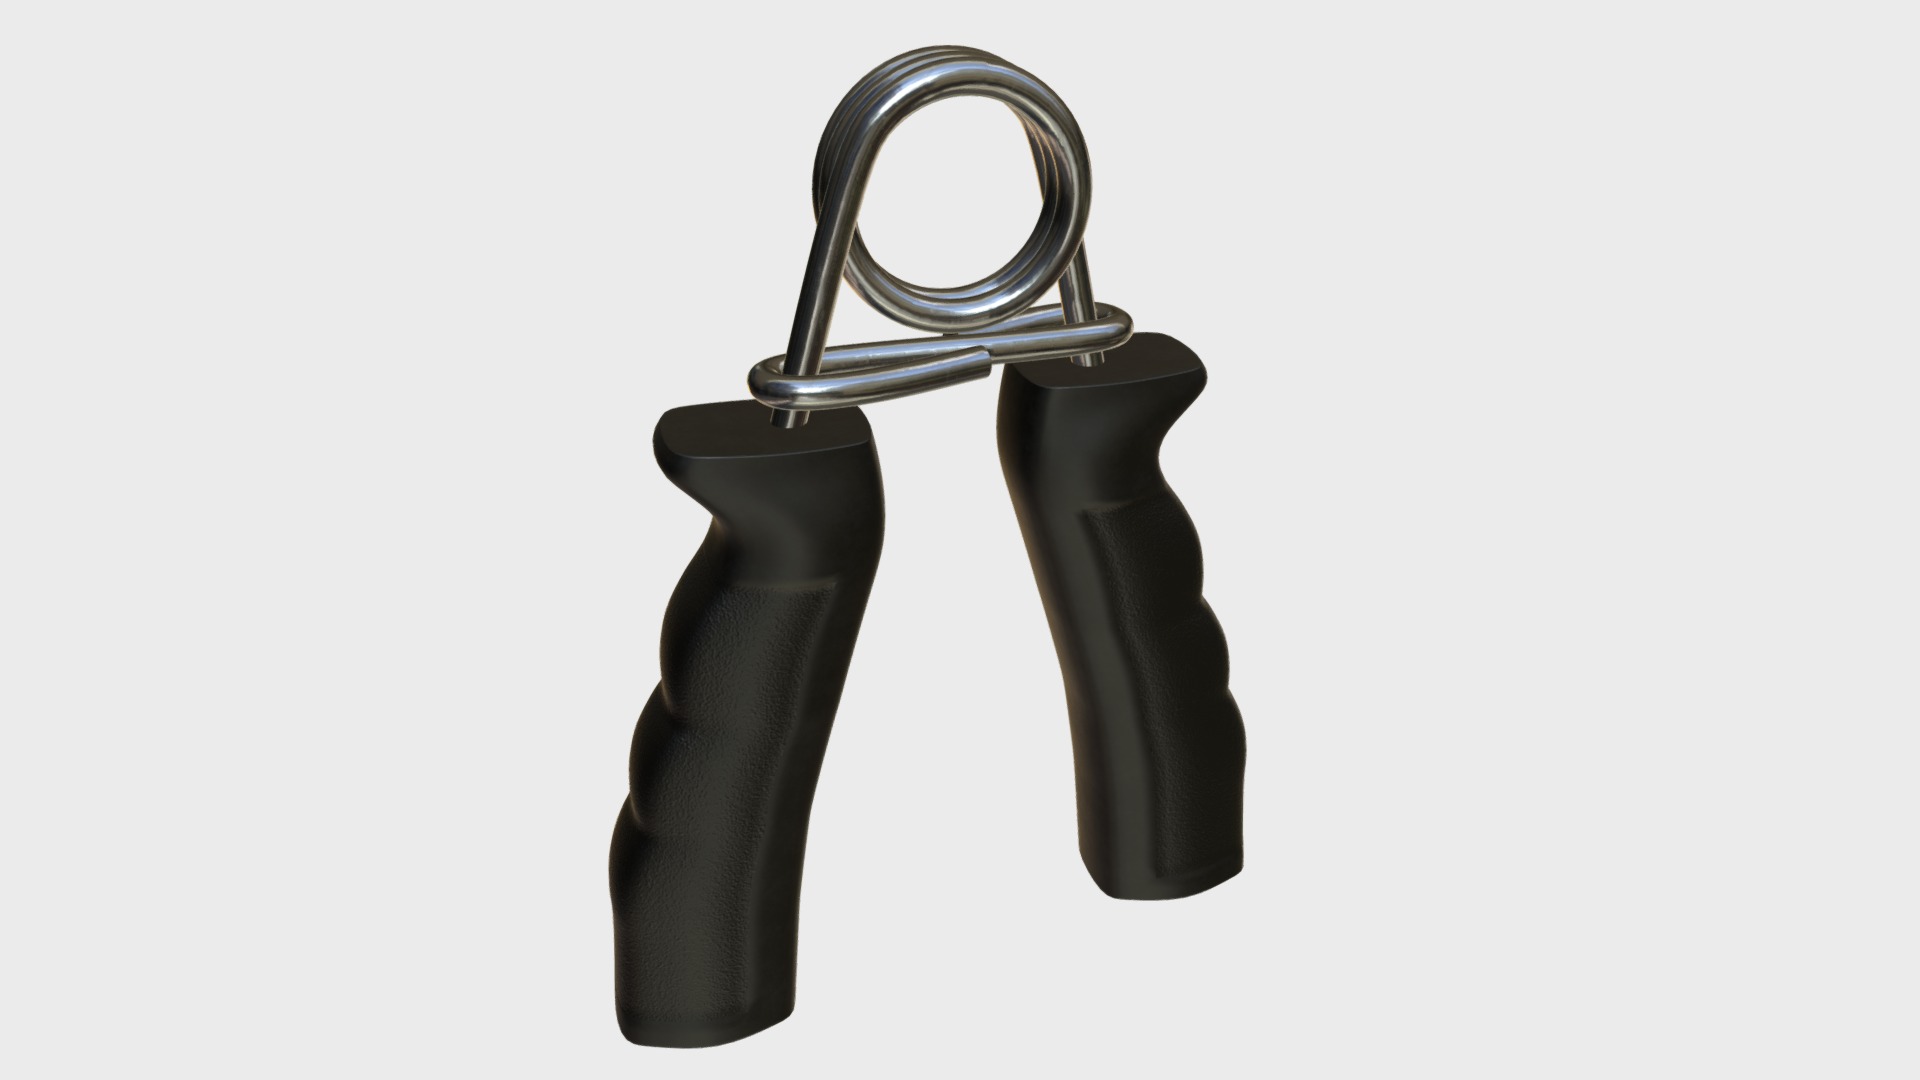 3D model Hand grip gym equipment 2 - This is a 3D model of the Hand grip gym equipment 2. The 3D model is about a pair of black keys.